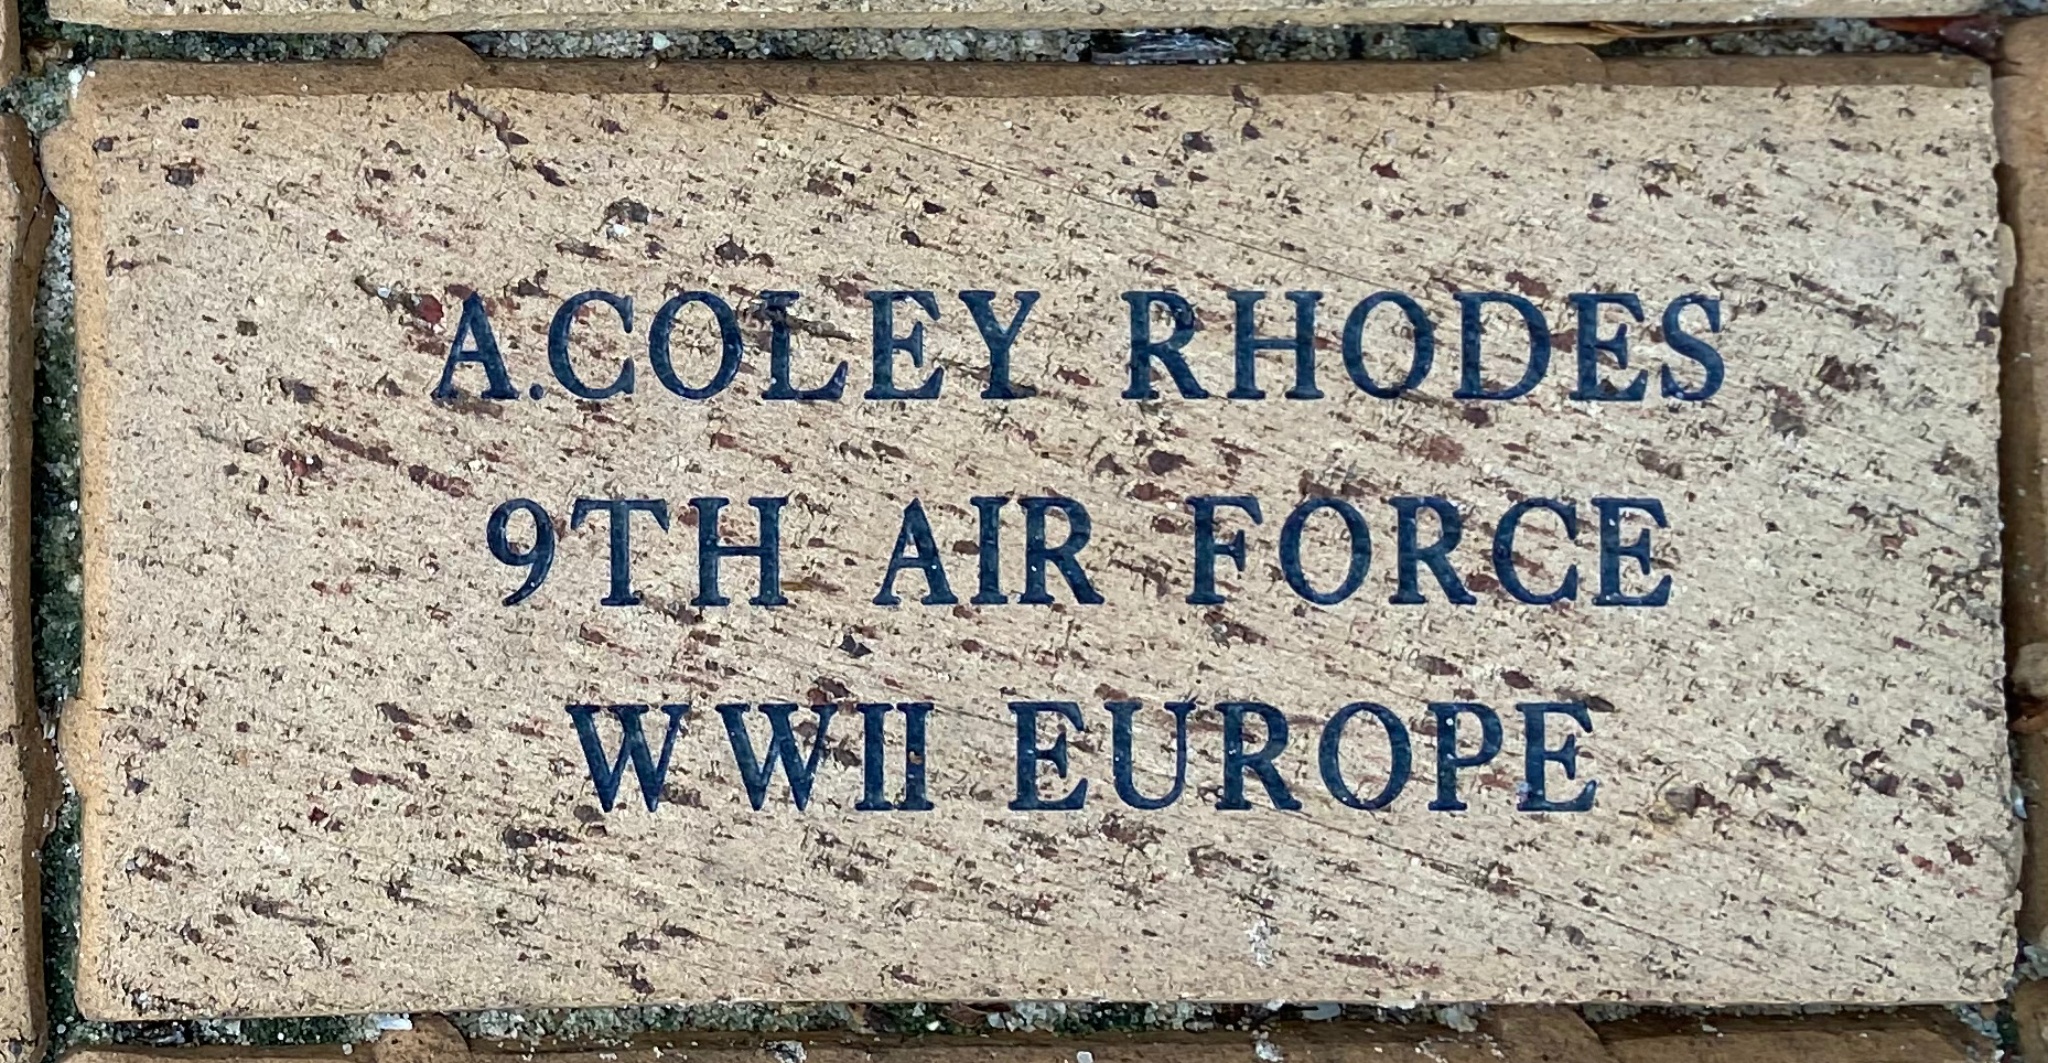 A. COLEY RHODES 9TH AIR FORCE WWII EUROPE